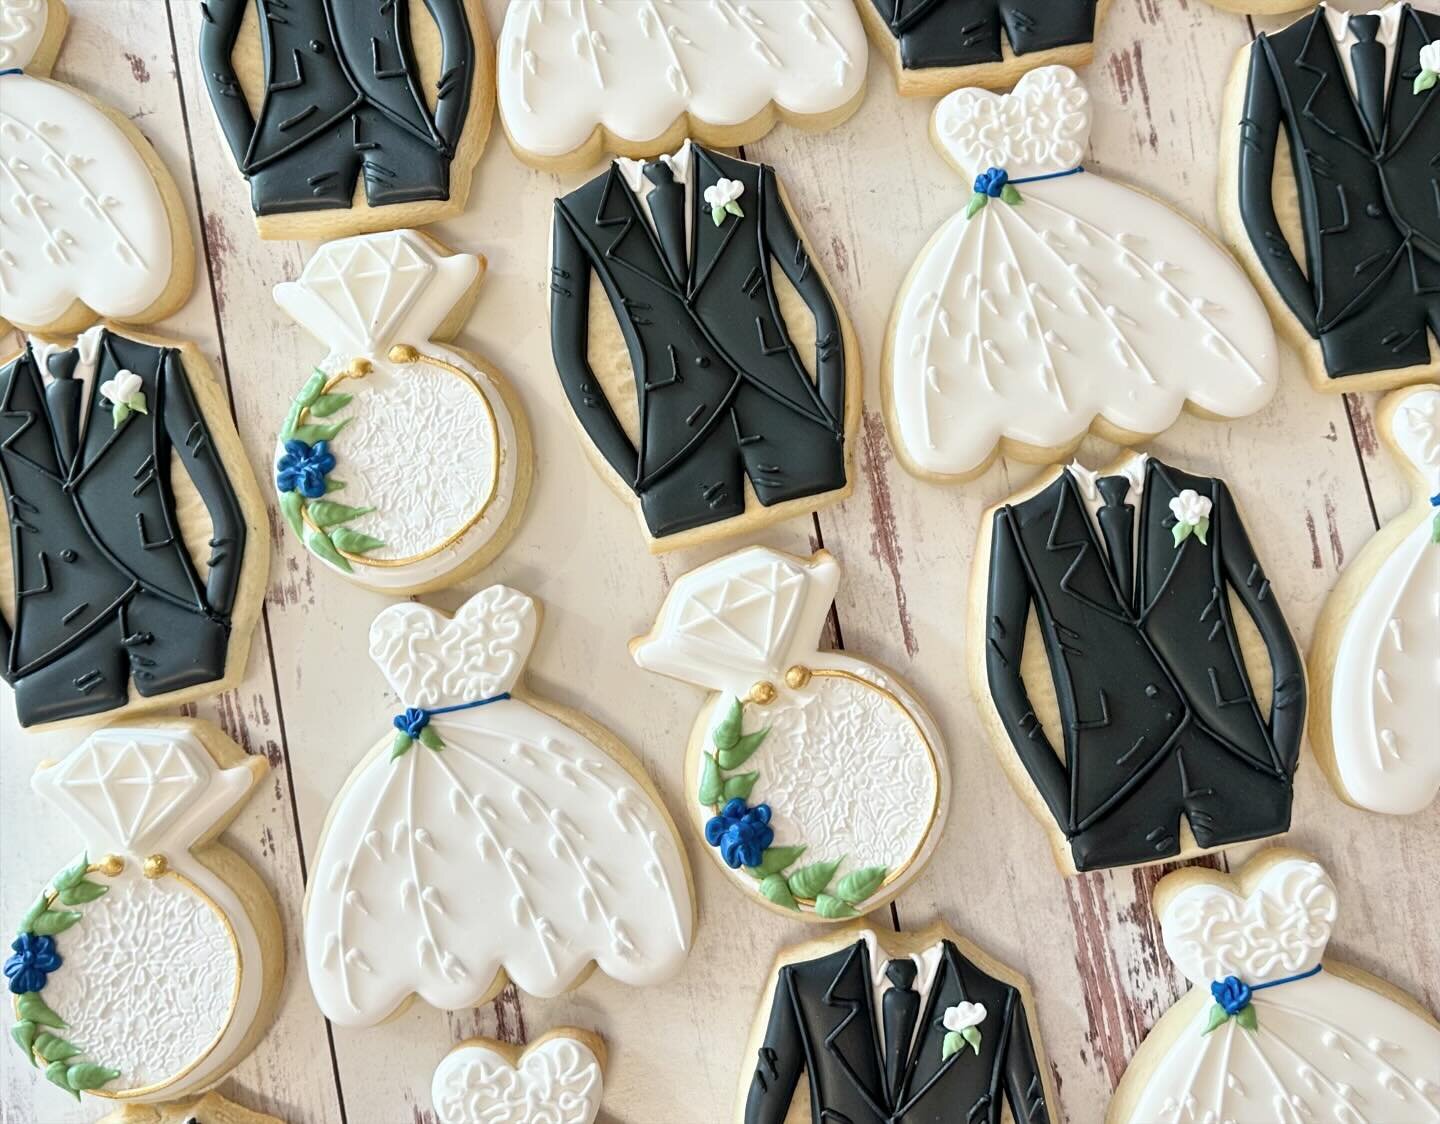 Just shipped this set to Massachusetts for a wedding shower! They make great party favors. 

#weddingshowercookies
#jojoscookieboutique #hayesvillenc #customcookies #partyfavors #decoratedcookies